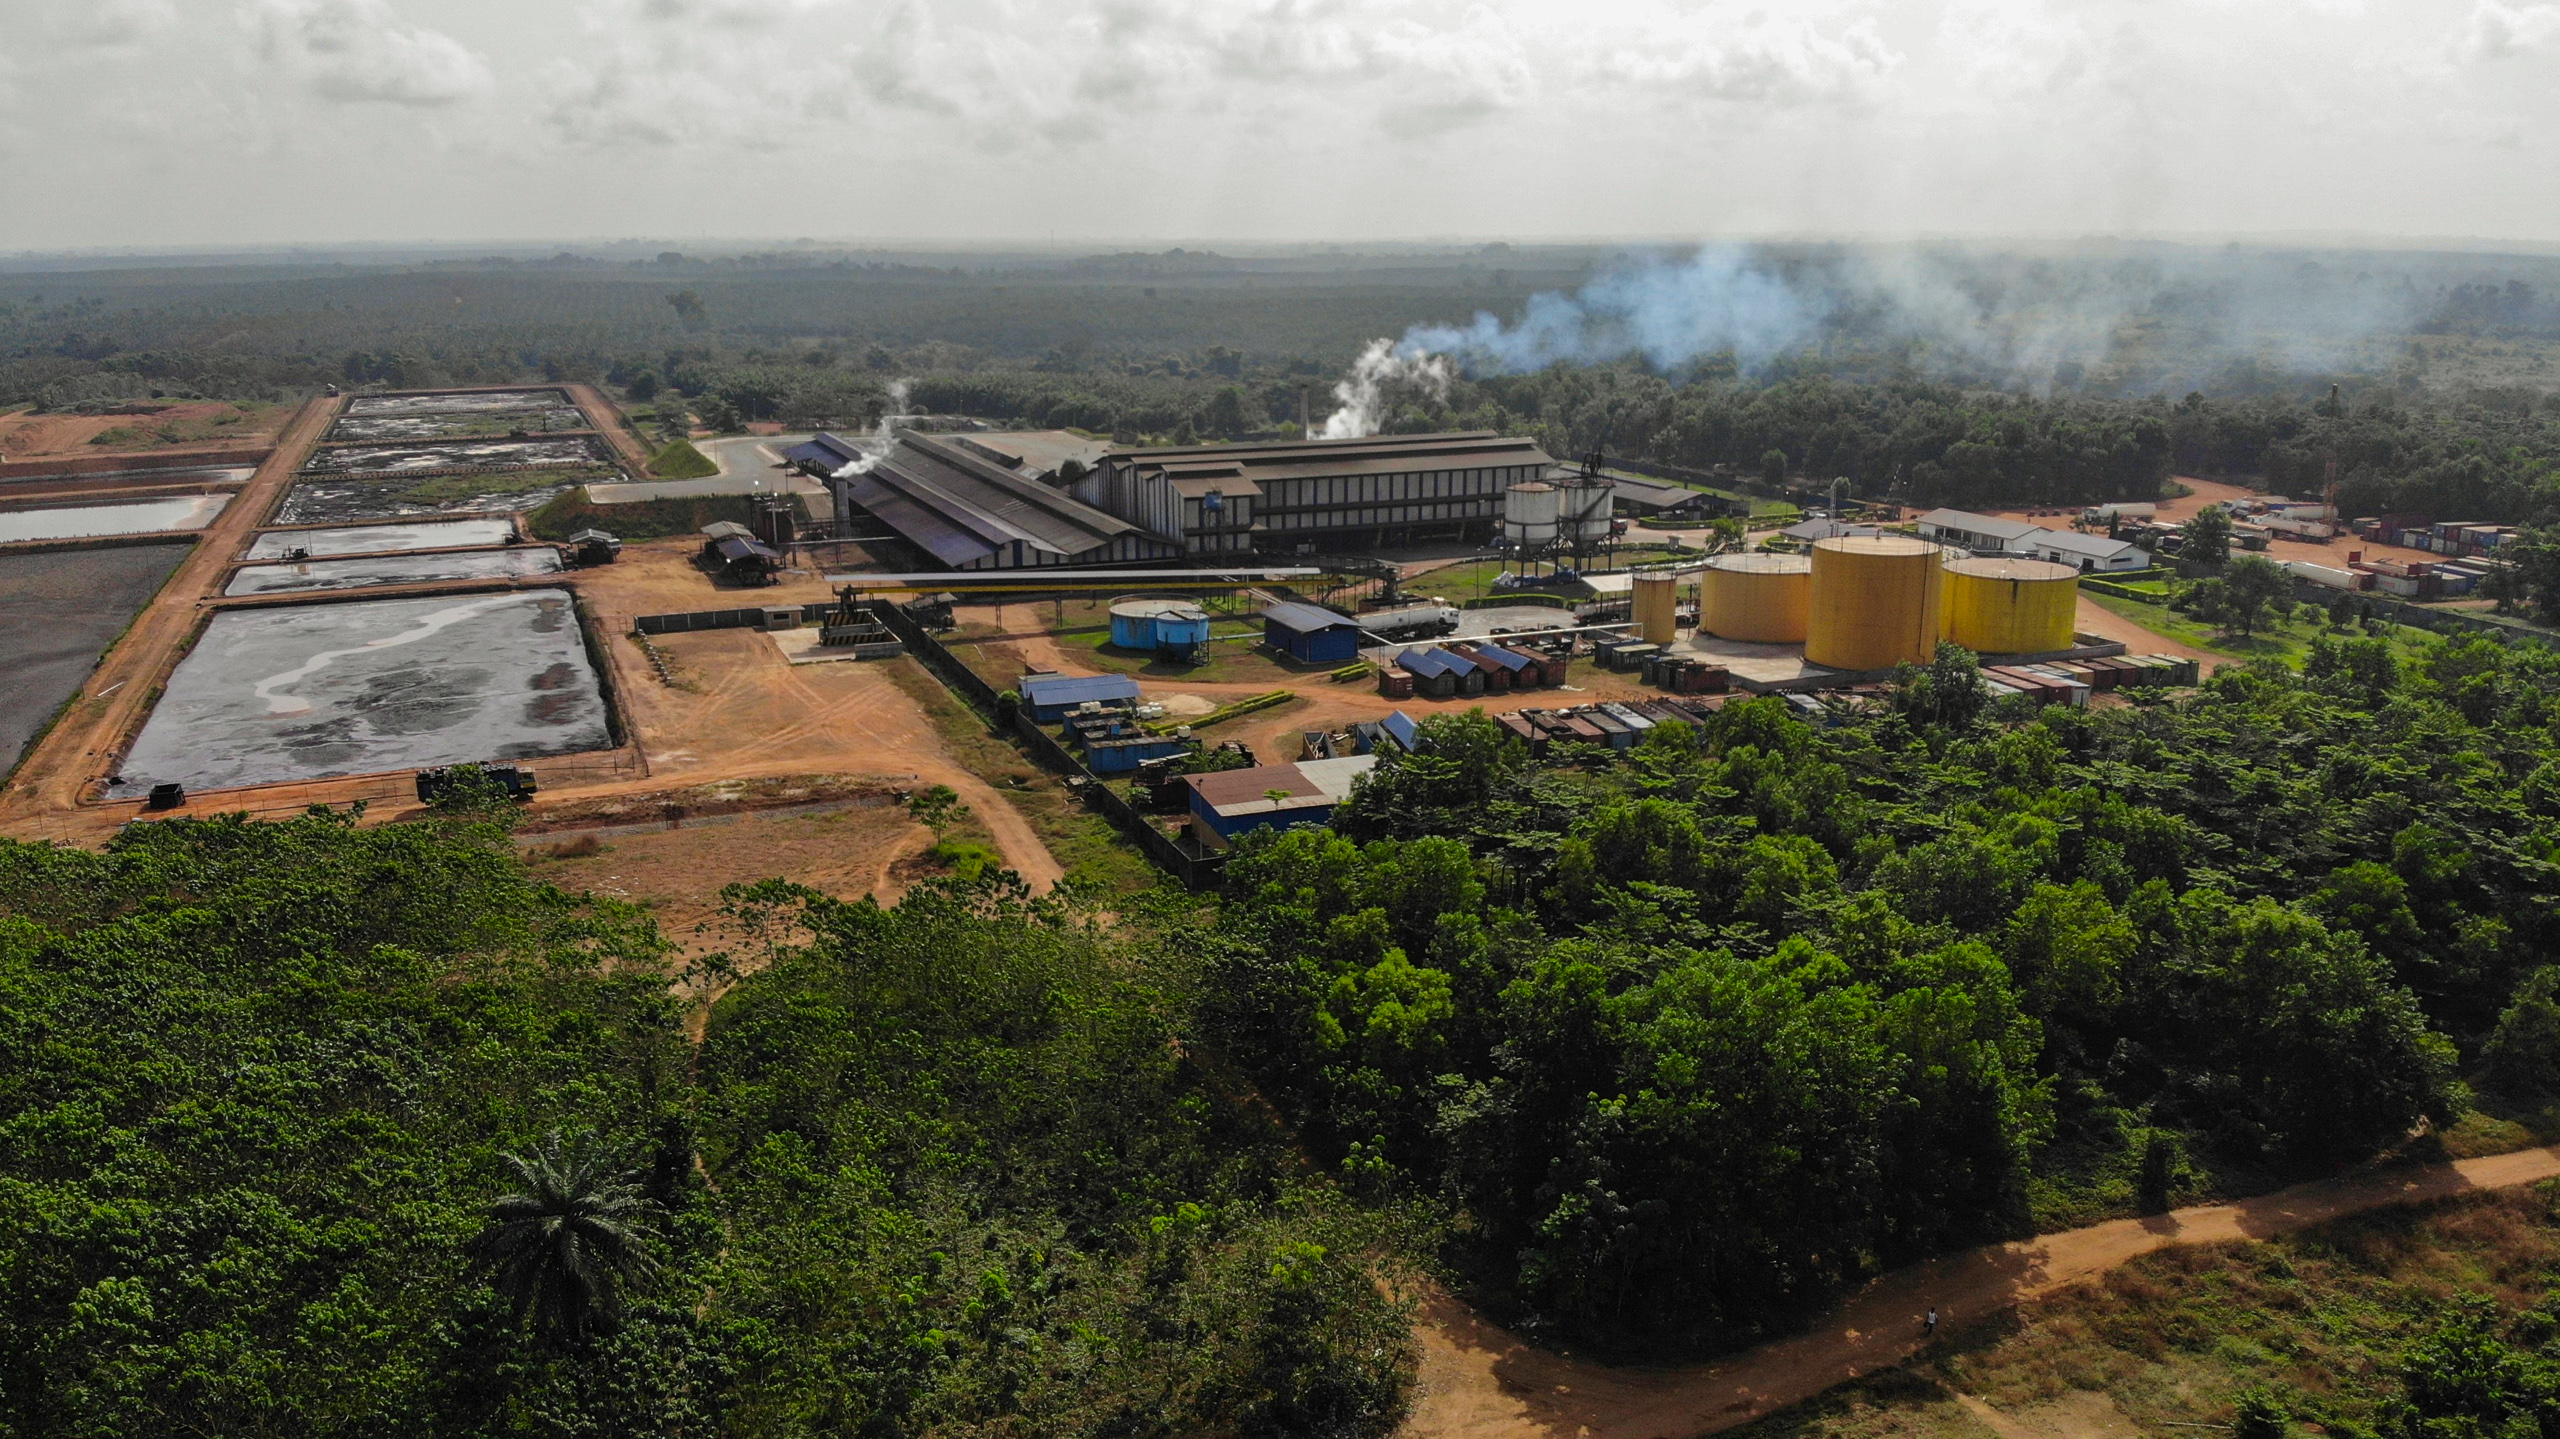 SAC’s oil palm mill was built in 2015 to process fruit from its Malen plantation.